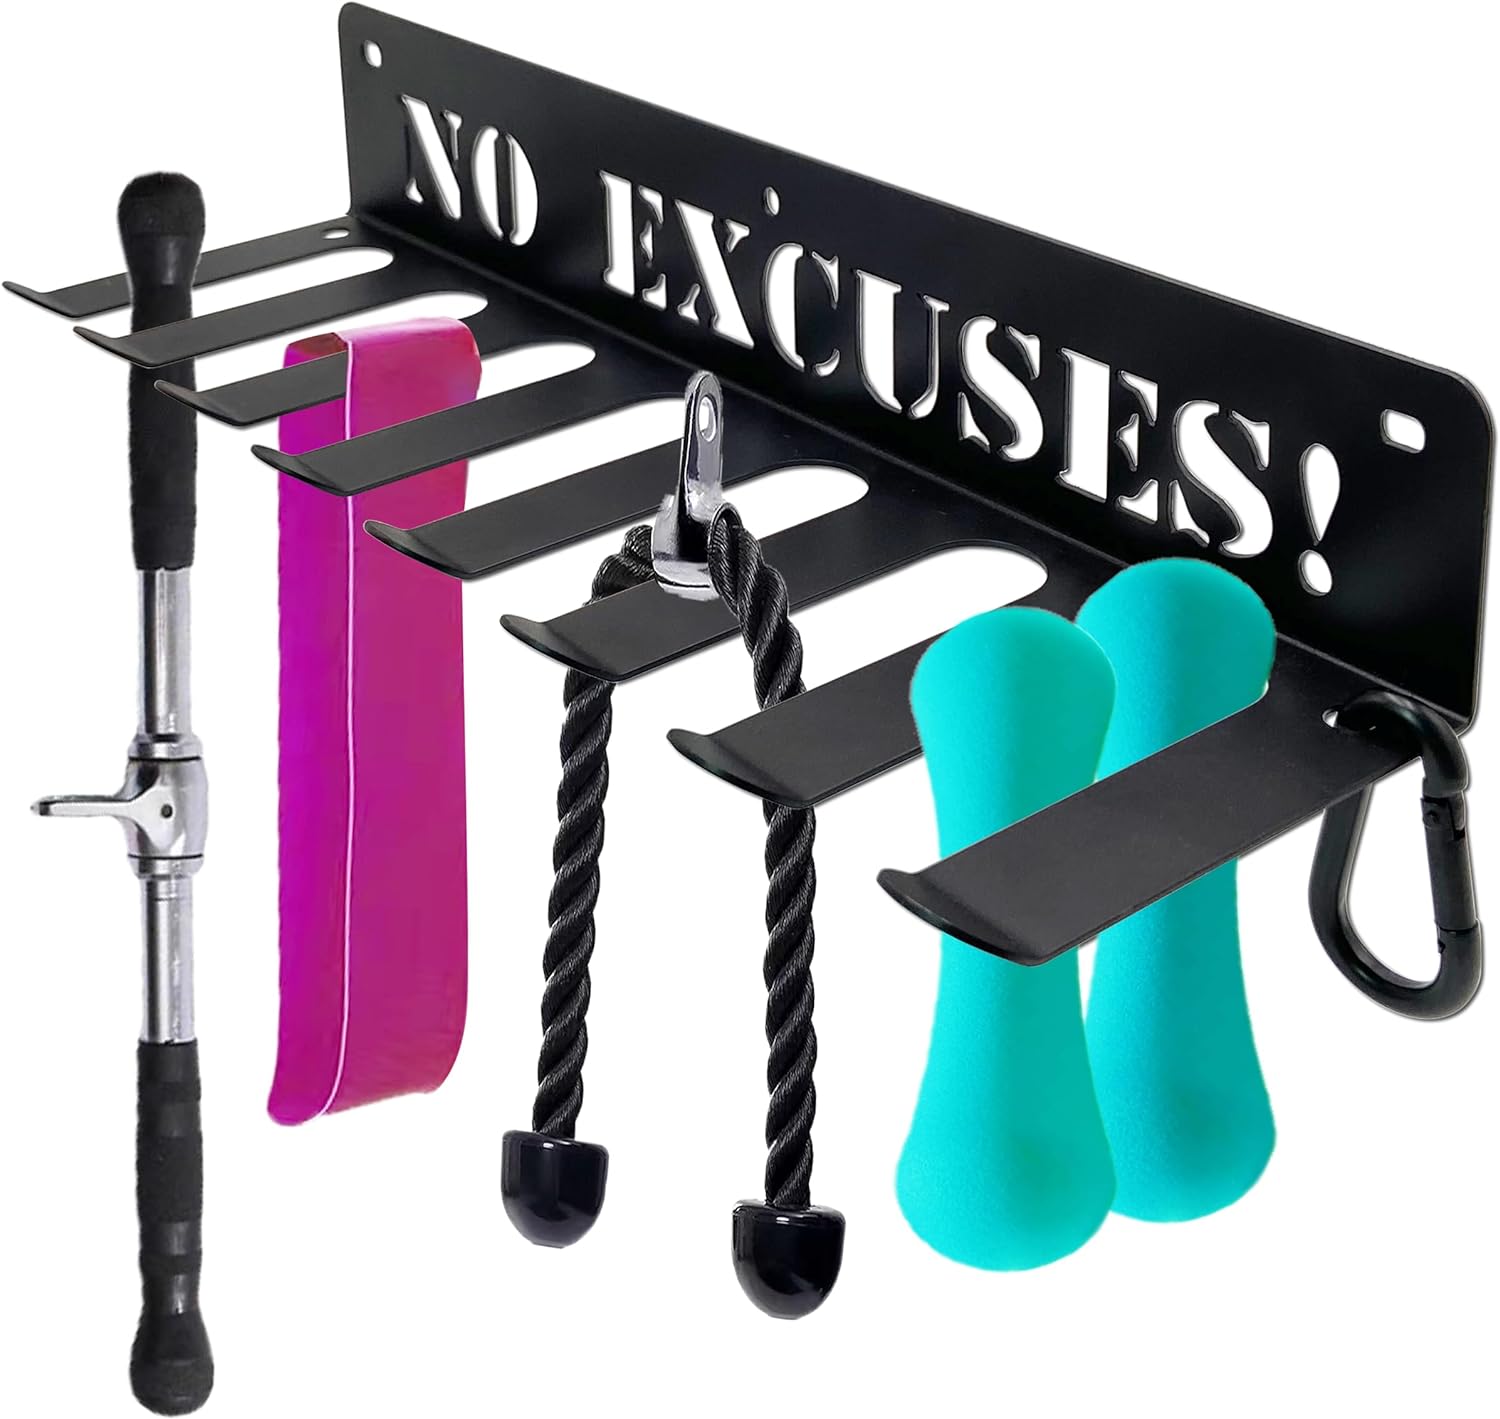 Home Gym Accessories Organization Storage Rack, Gym Equipment Storage For Home, 8 Hook Wall Hanger For Gear Barbells Resistance Bands Jump Ropes Lifting Belt